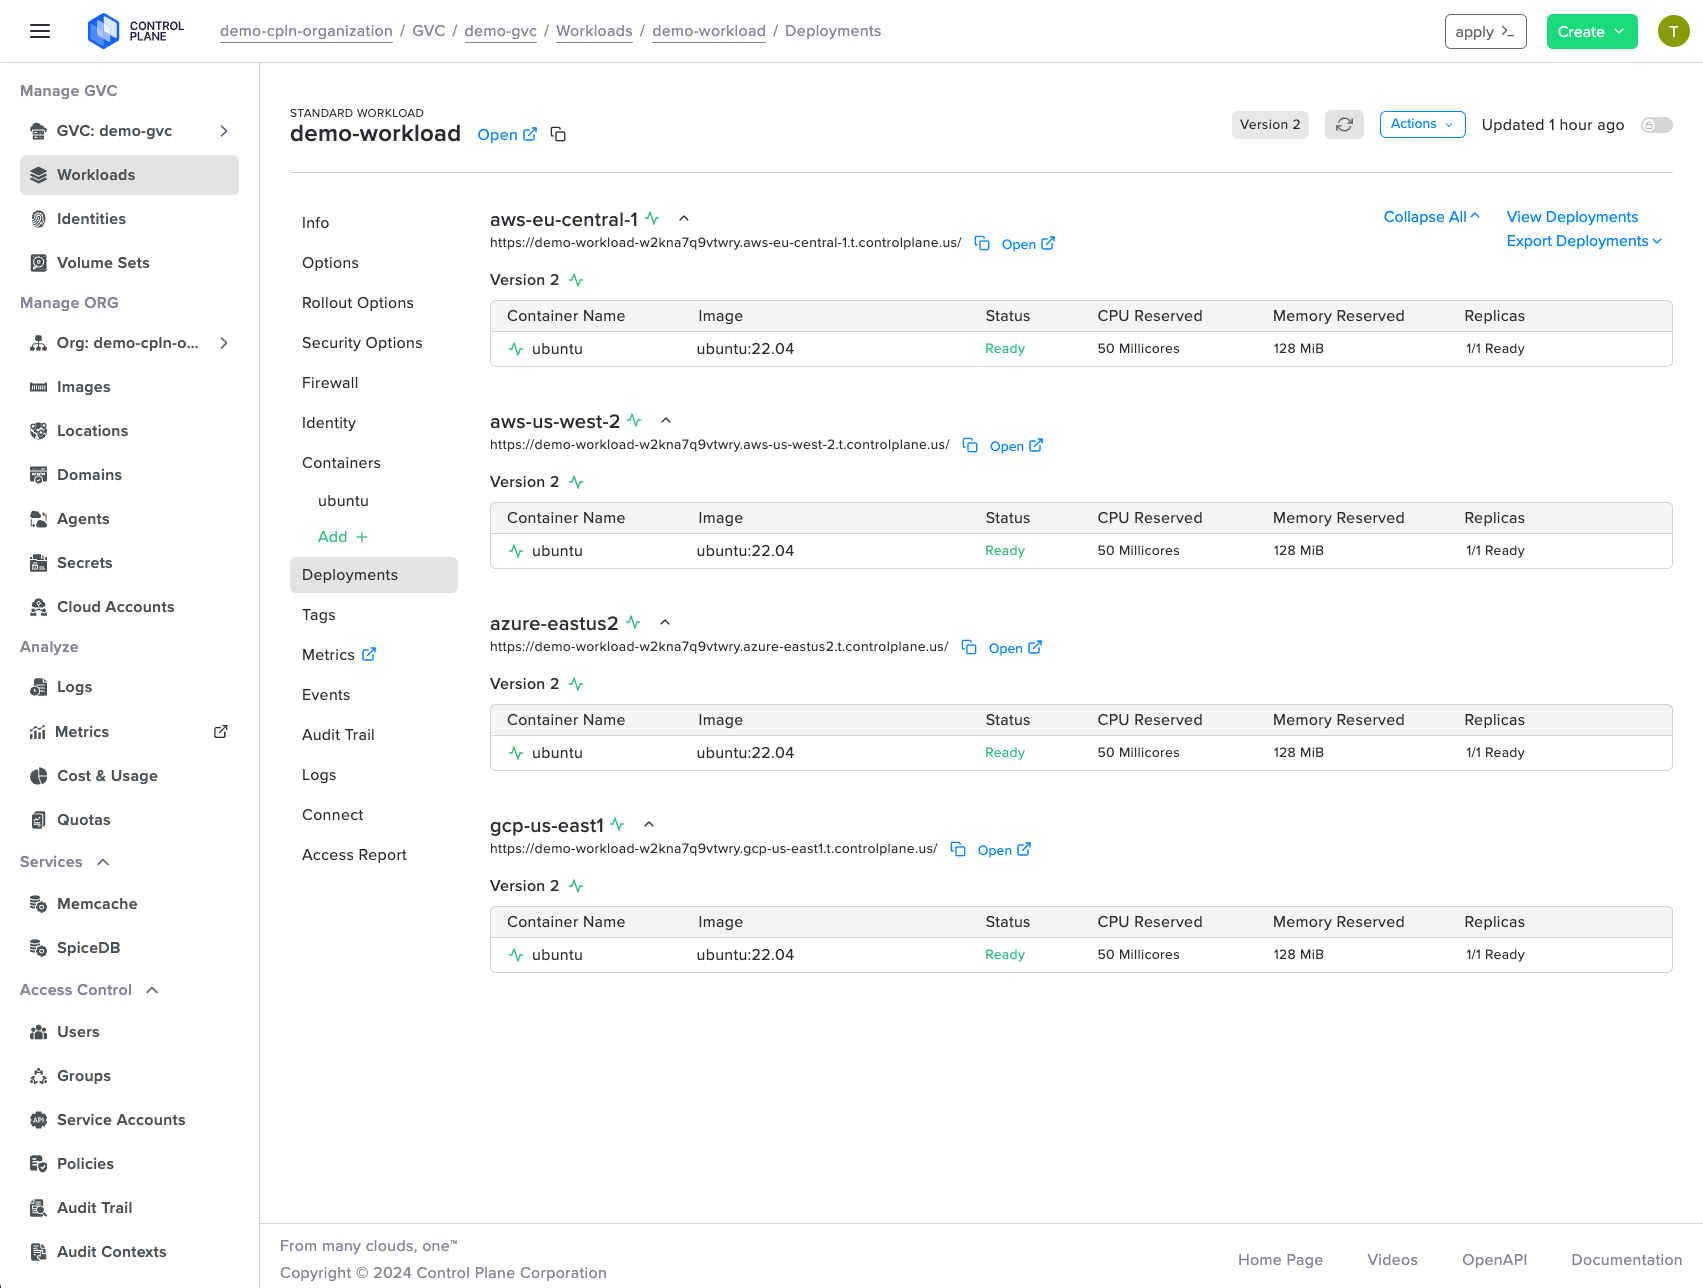 Screenshot shows the Control Plane console, providing a clear and consolidated view of each deployment, including details like health status, current location, CPU, and memory utilization, across multiple cloud providers and regions.